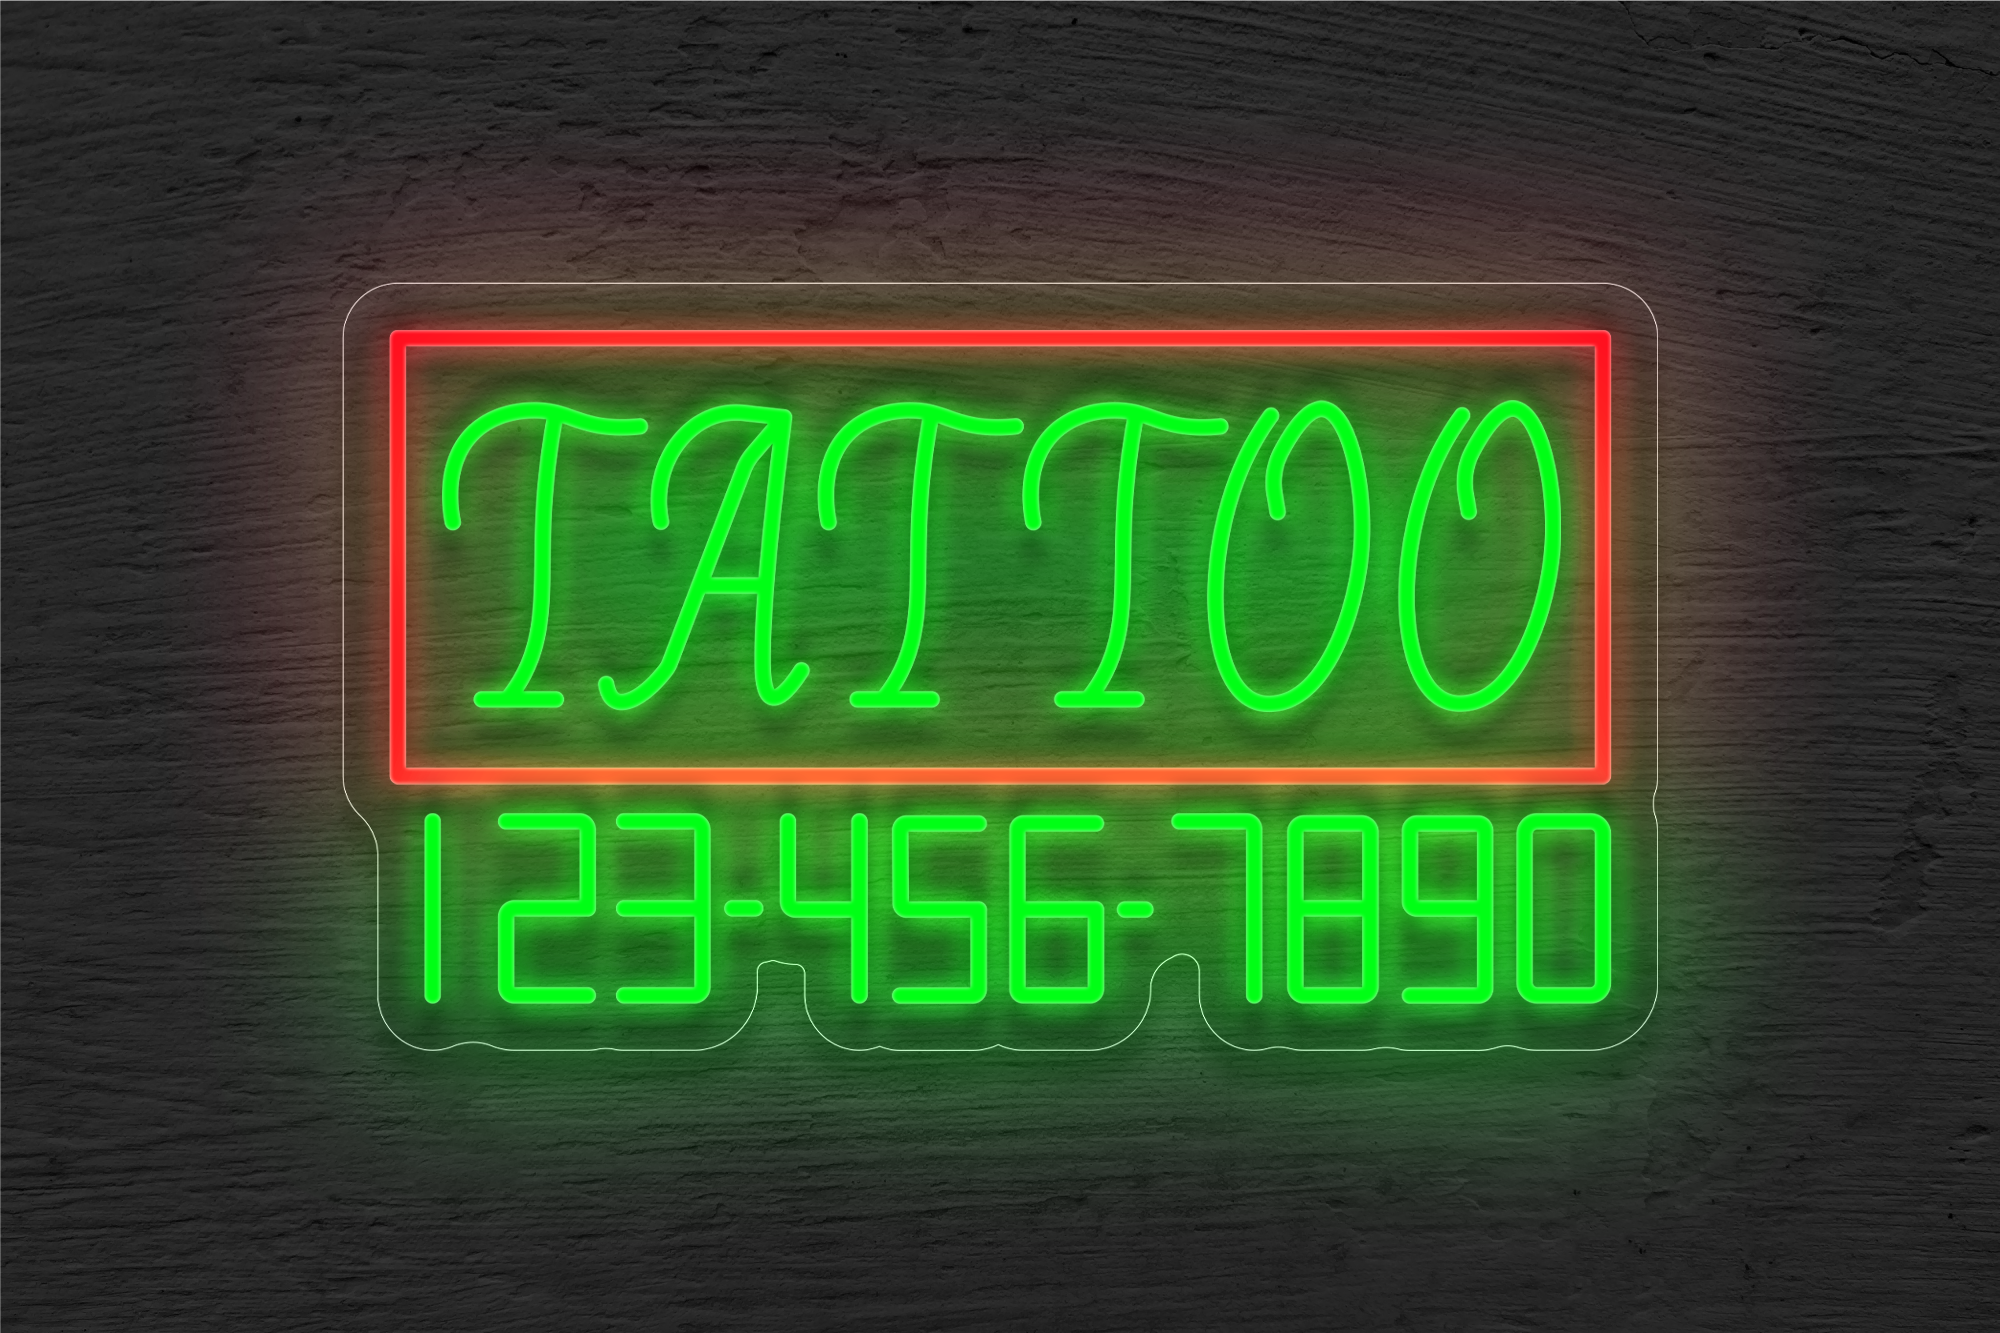 "Tattoo" with Border and Phone Number LED Neon Sign